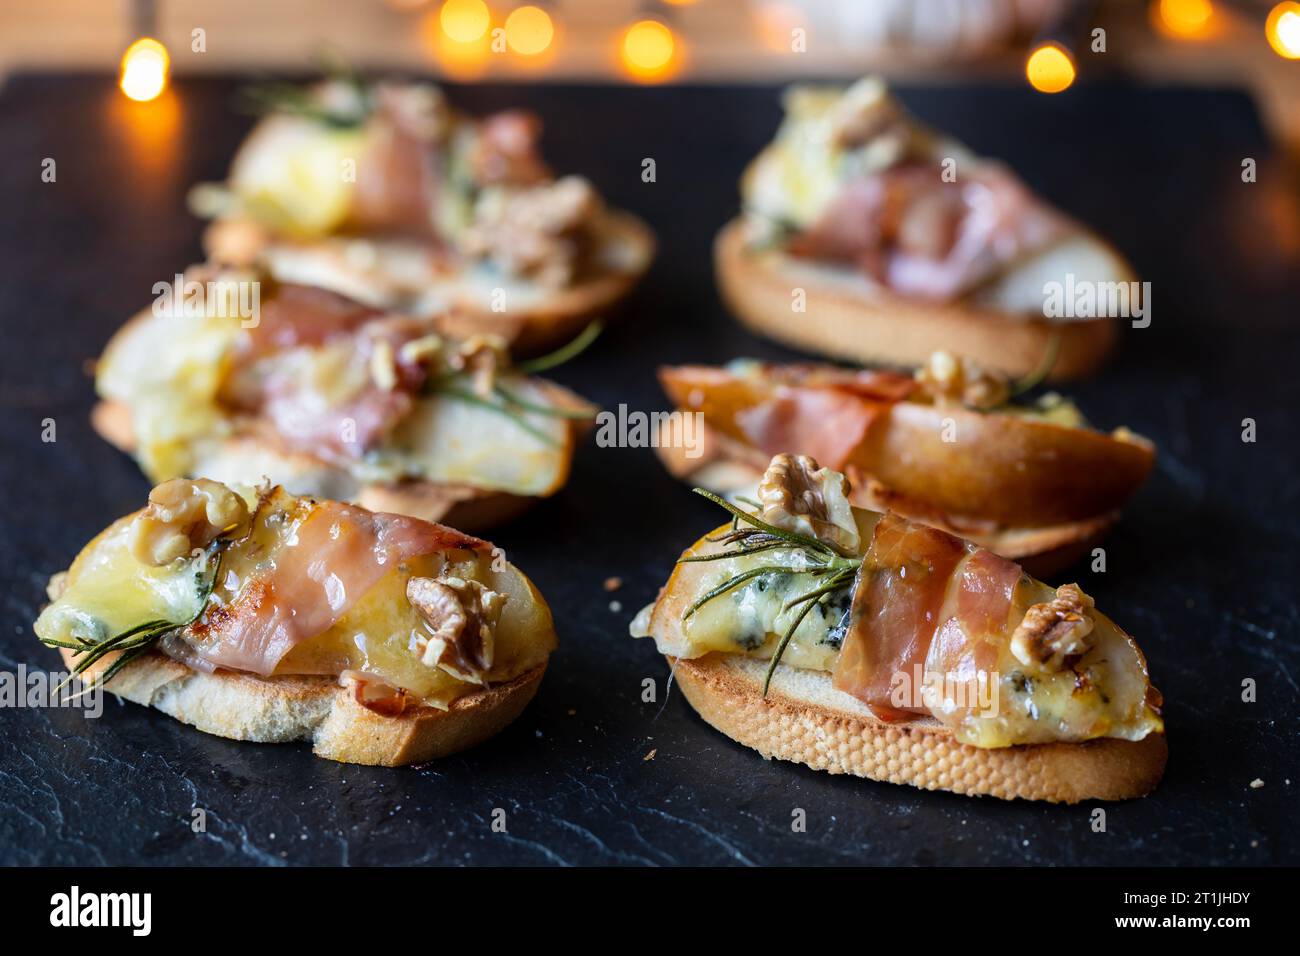 Christmas canapes made of pears, blue cheese and Parma ham Stock Photo